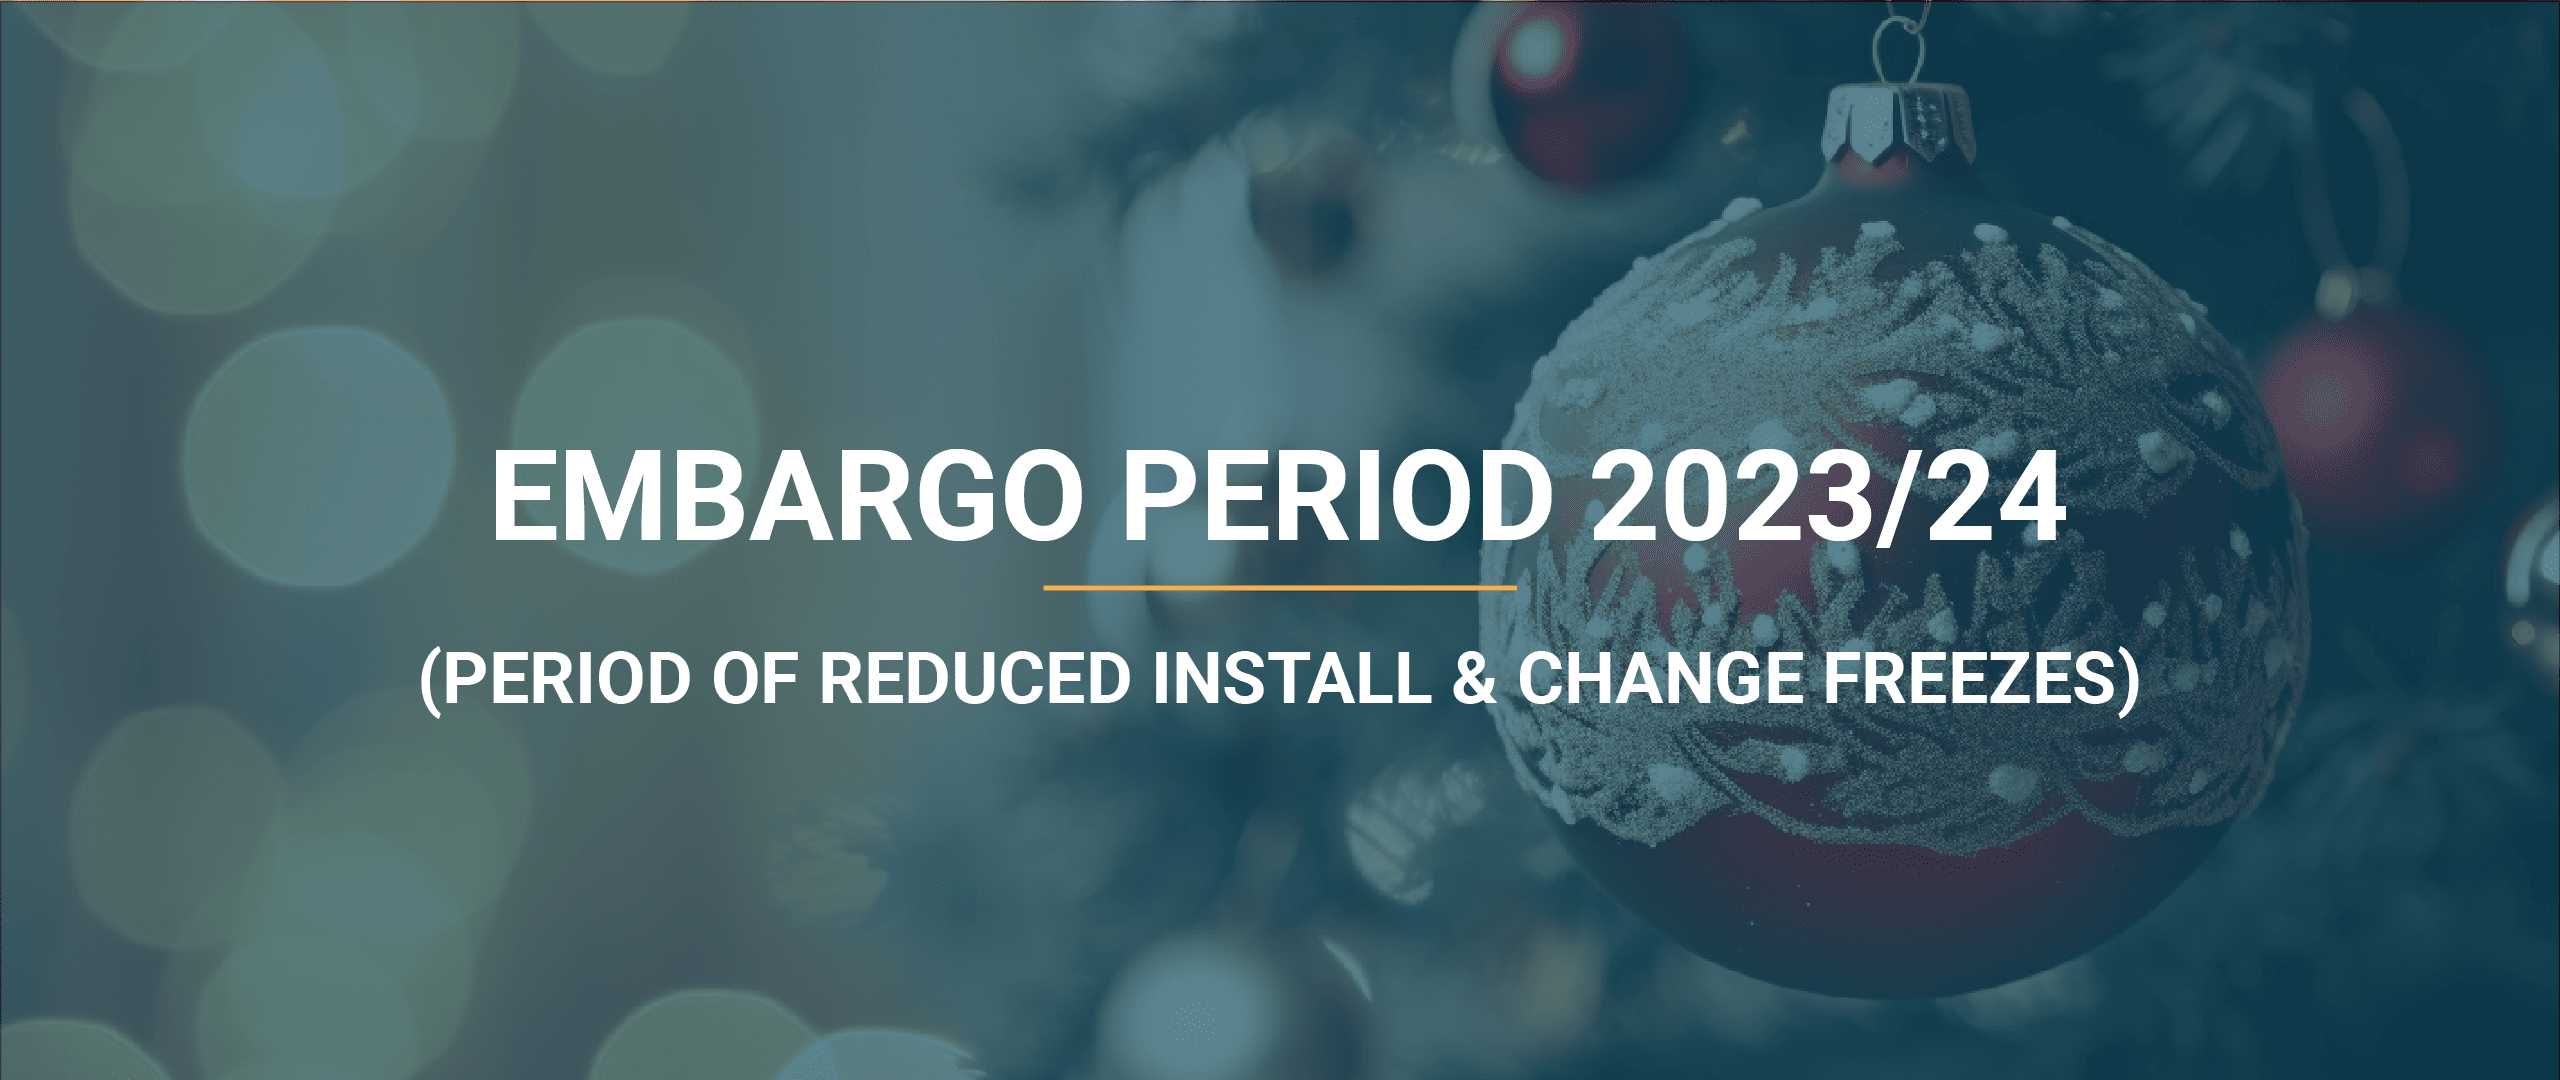 The Embargo / Brownout Period of 2023-2024